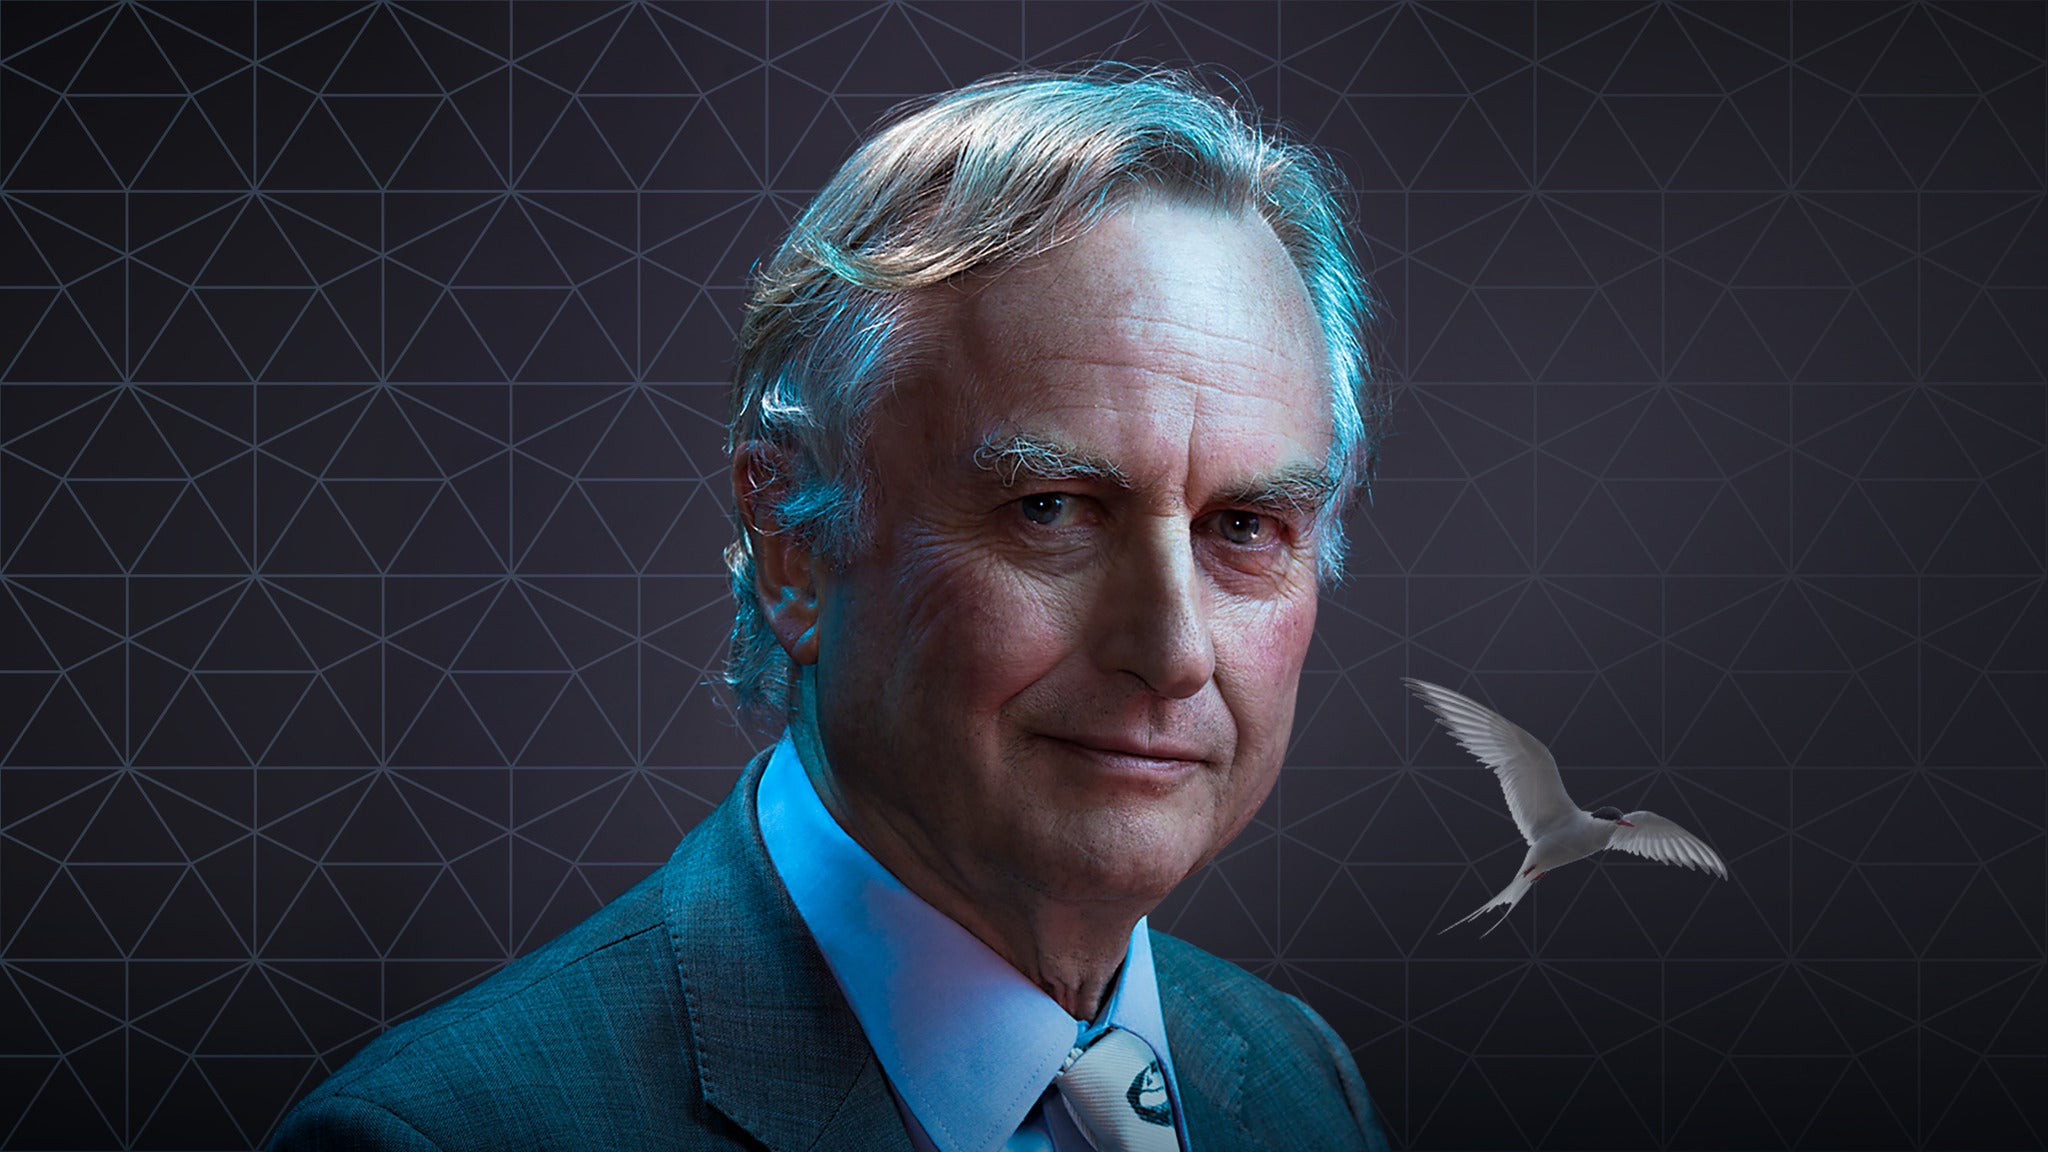 Image used with permission from Ticketmaster | An Evening With Richard Dawkins tickets